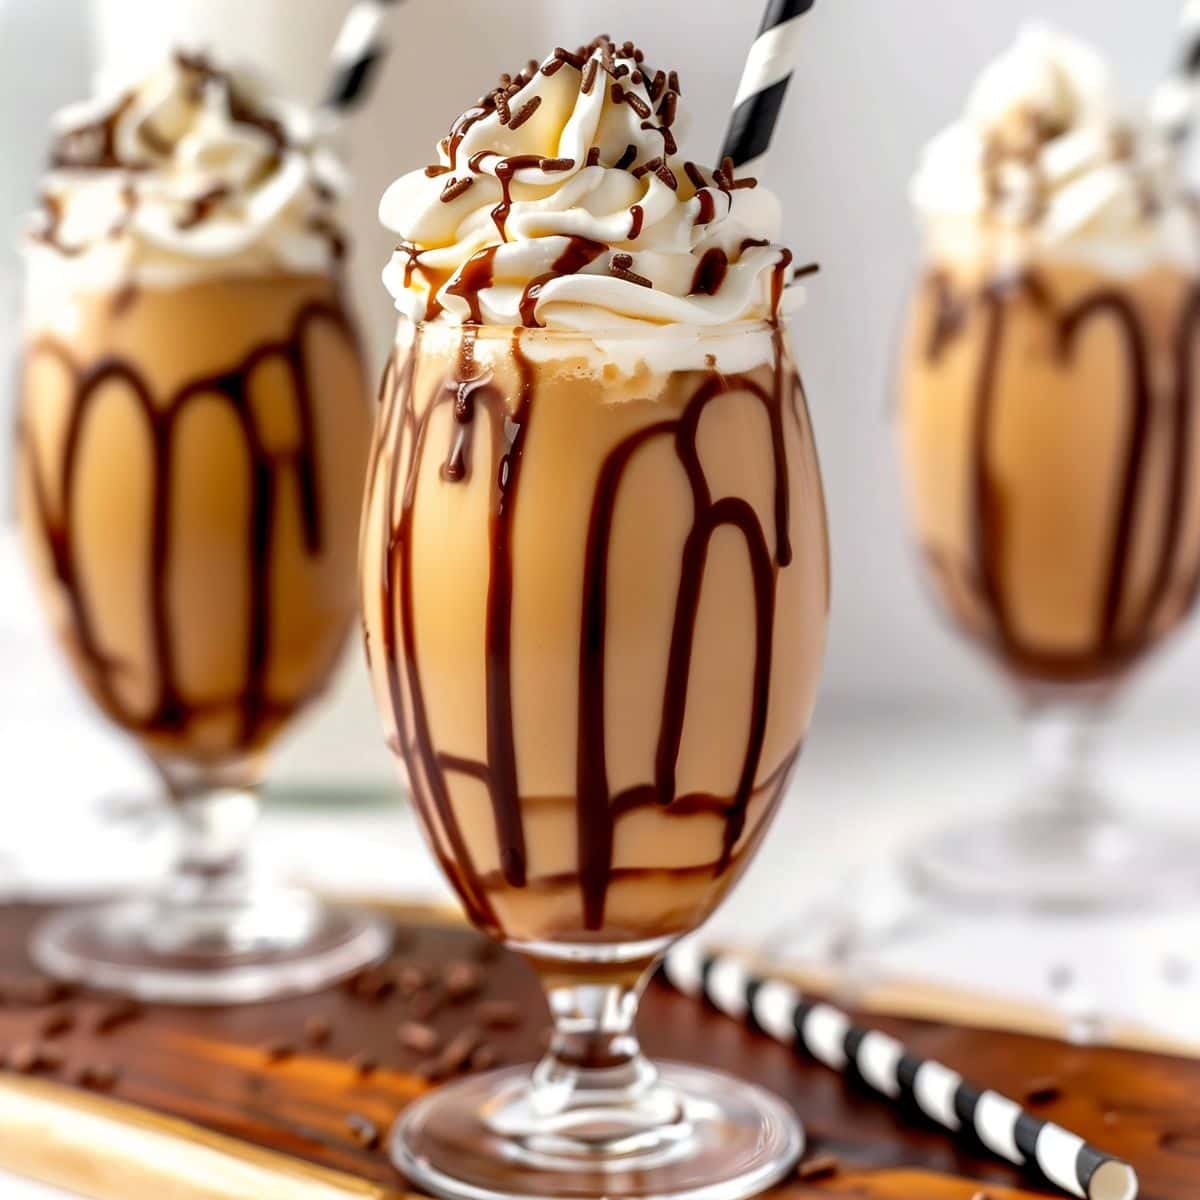 Three Frozen Mudslides in Tall Glasses with Whipped Cream, Chocolate Sprinkles, and Chocolate Drizzle